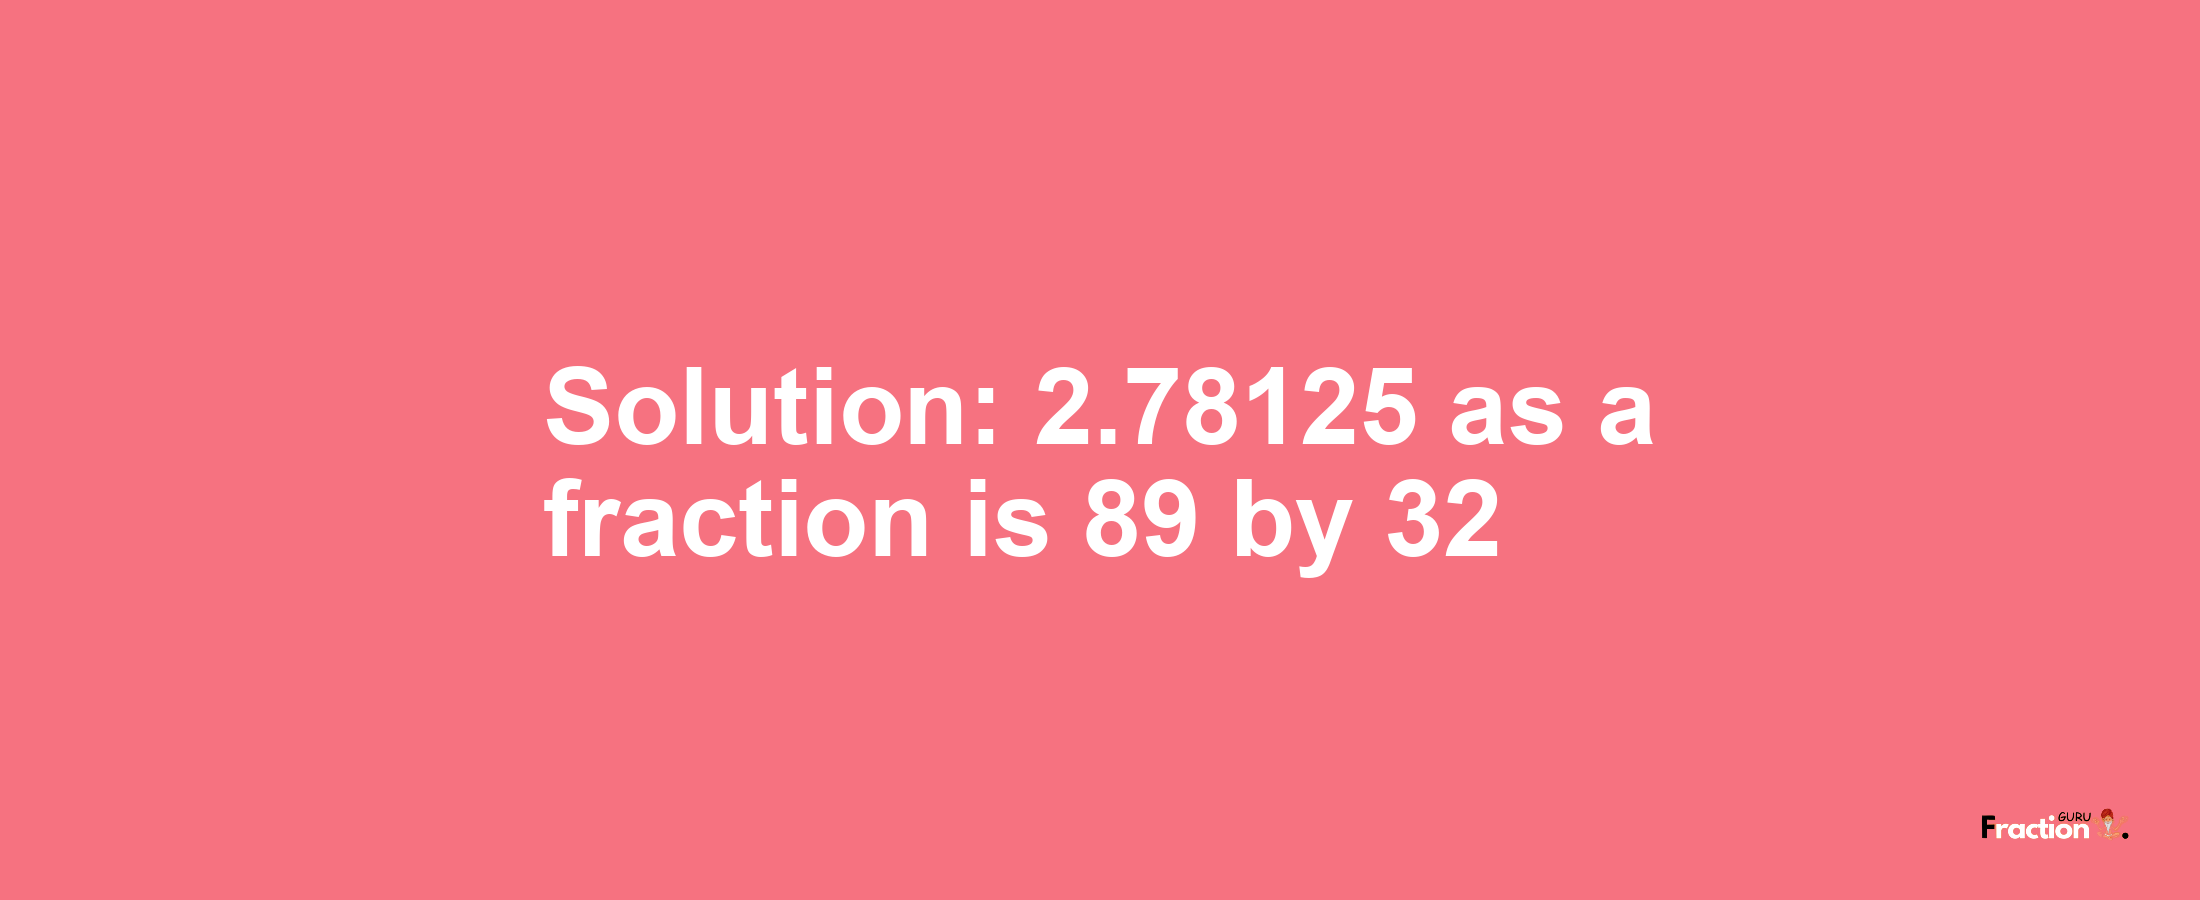 Solution:2.78125 as a fraction is 89/32